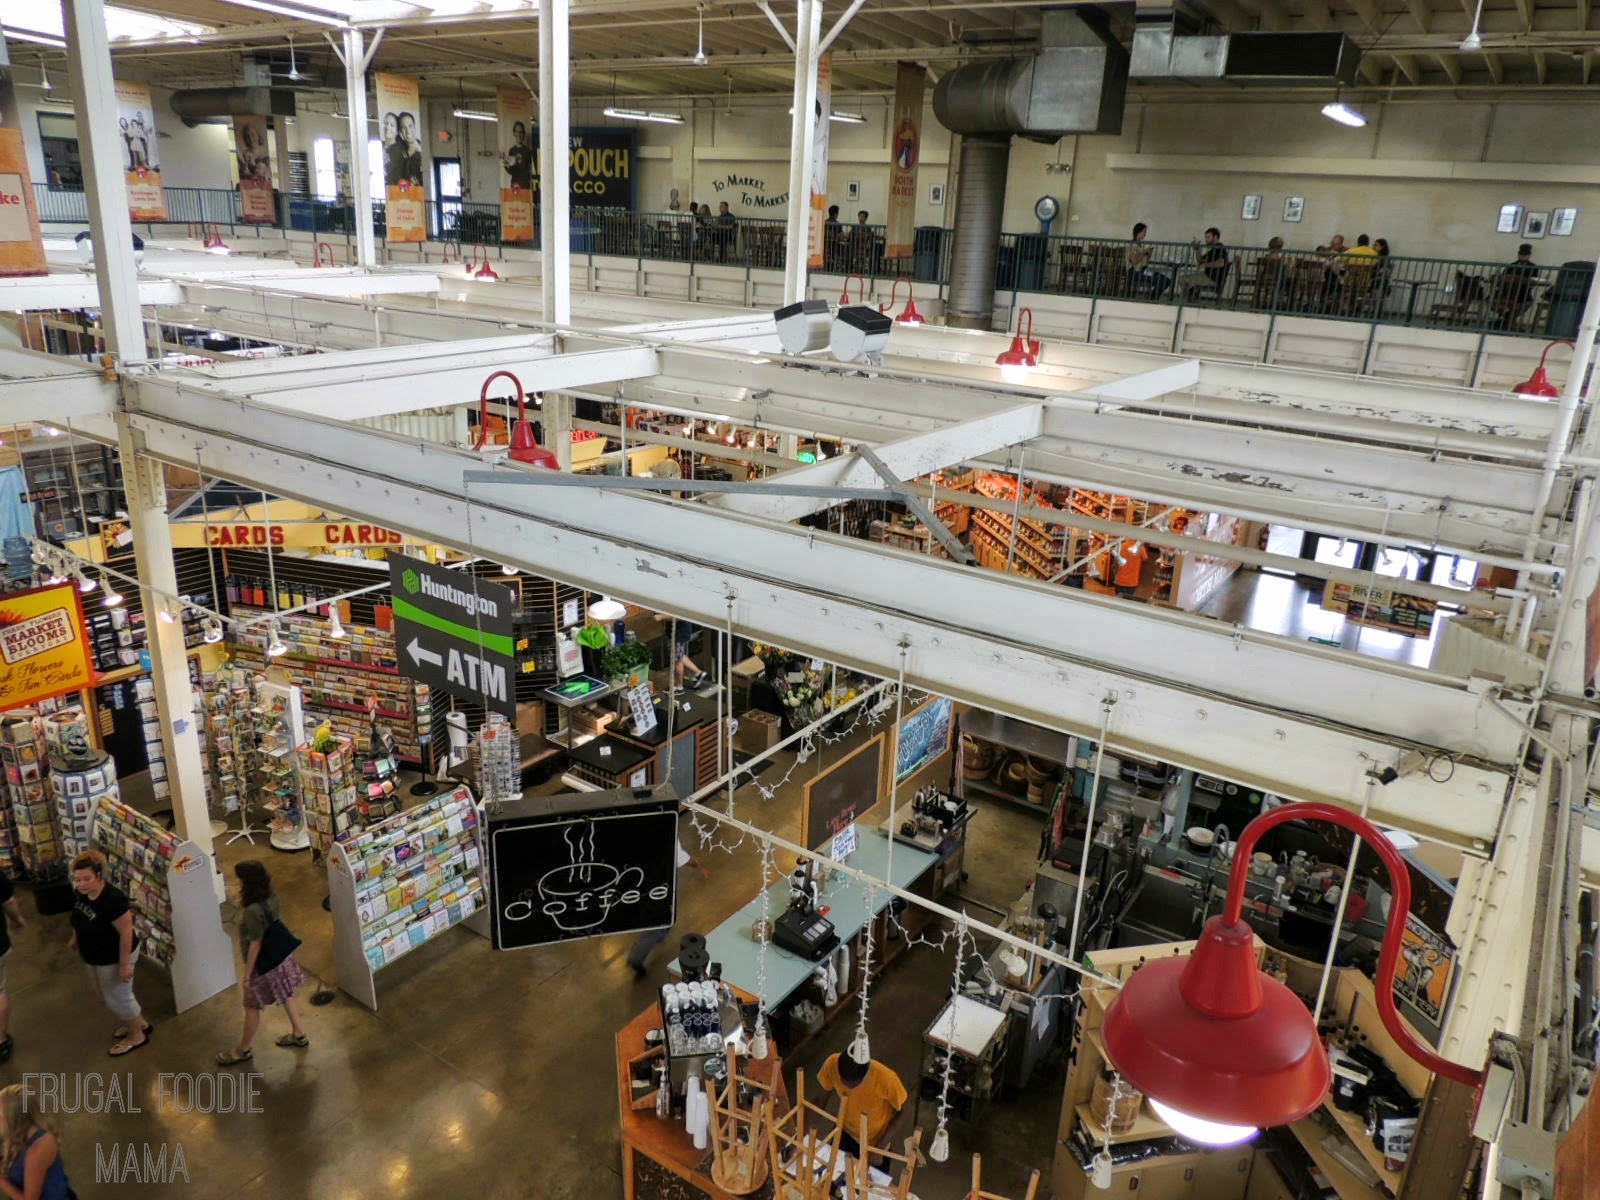 Family Friendly Travel in Columbus, OH- North Market via thefrugalfoodiemama.com